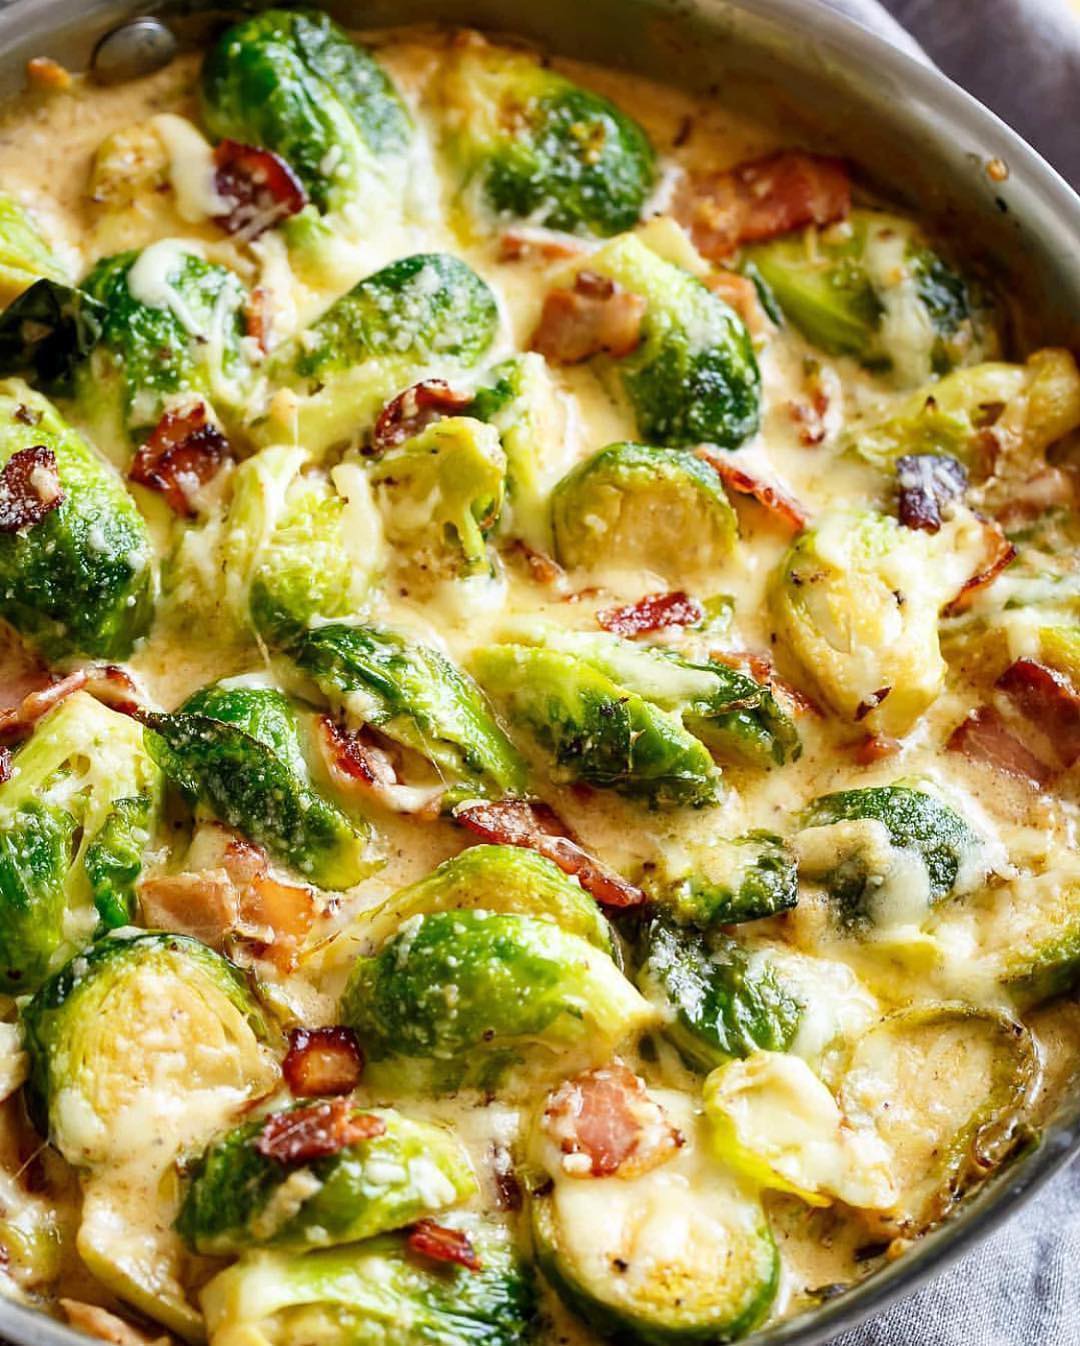 Creamy Garlic Parmesan Brussels Sprouts